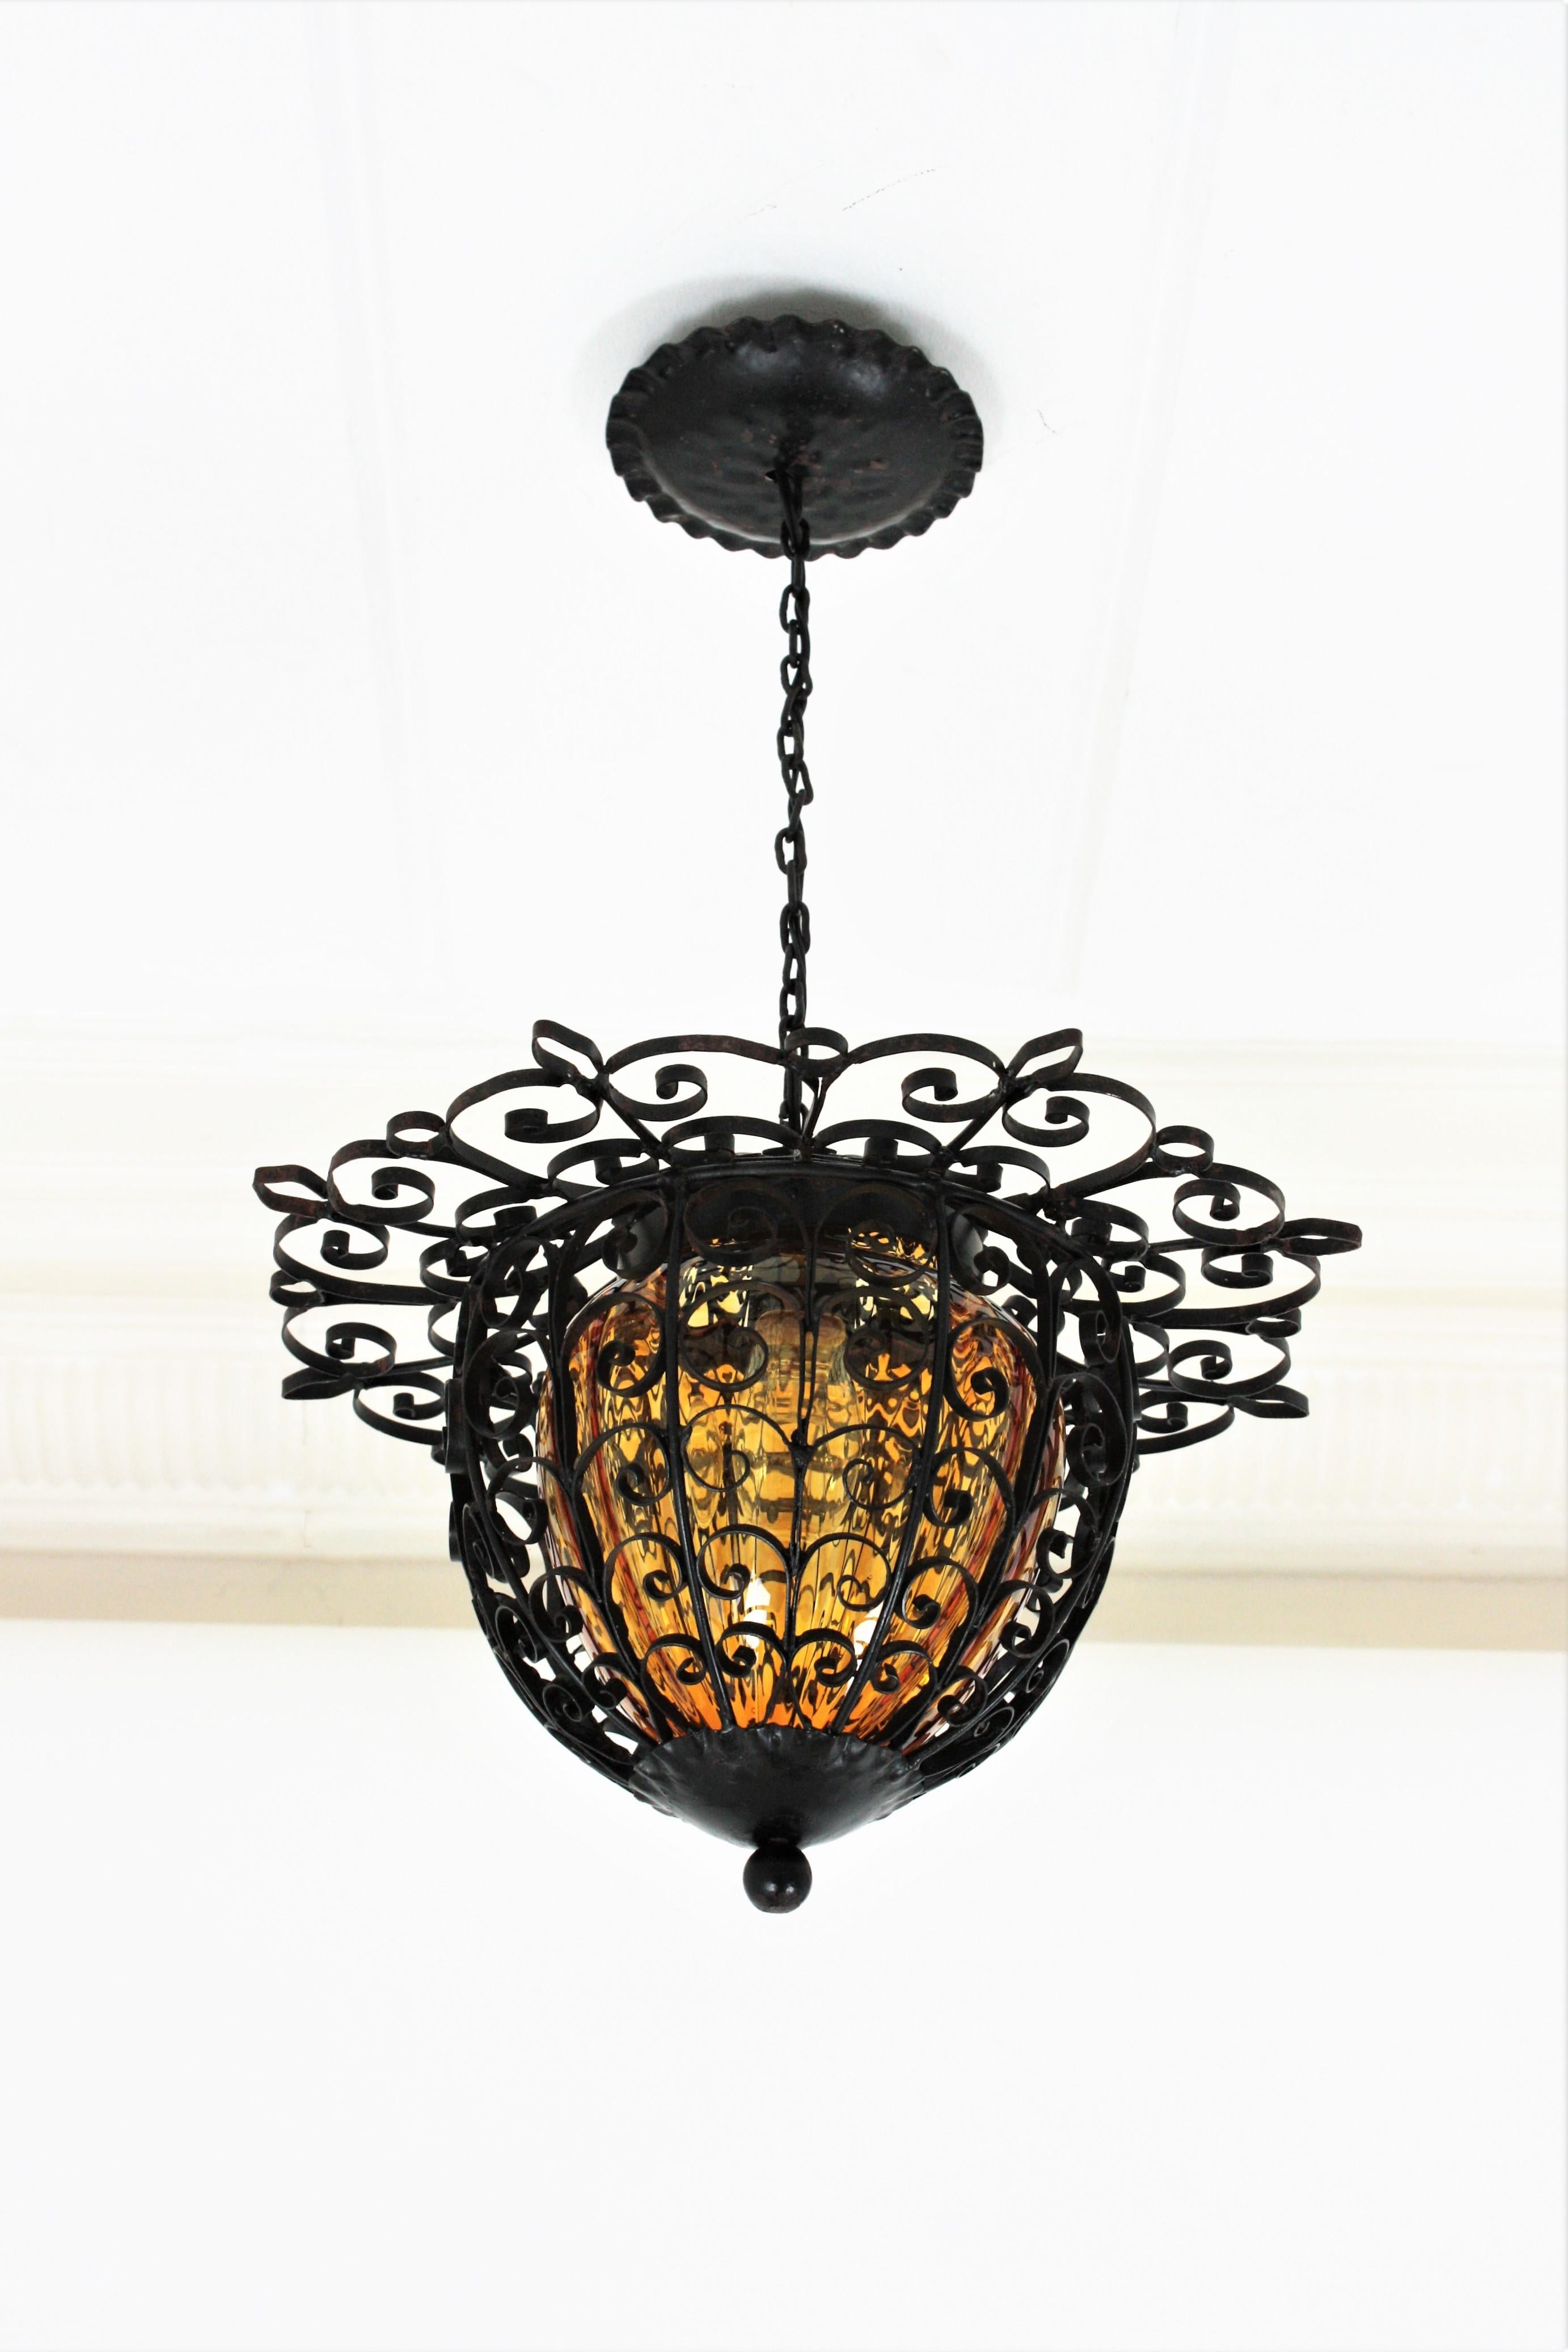 Forged Spanish Wrought Iron Lantern Pendant Light with Hand Blown Glass Shade